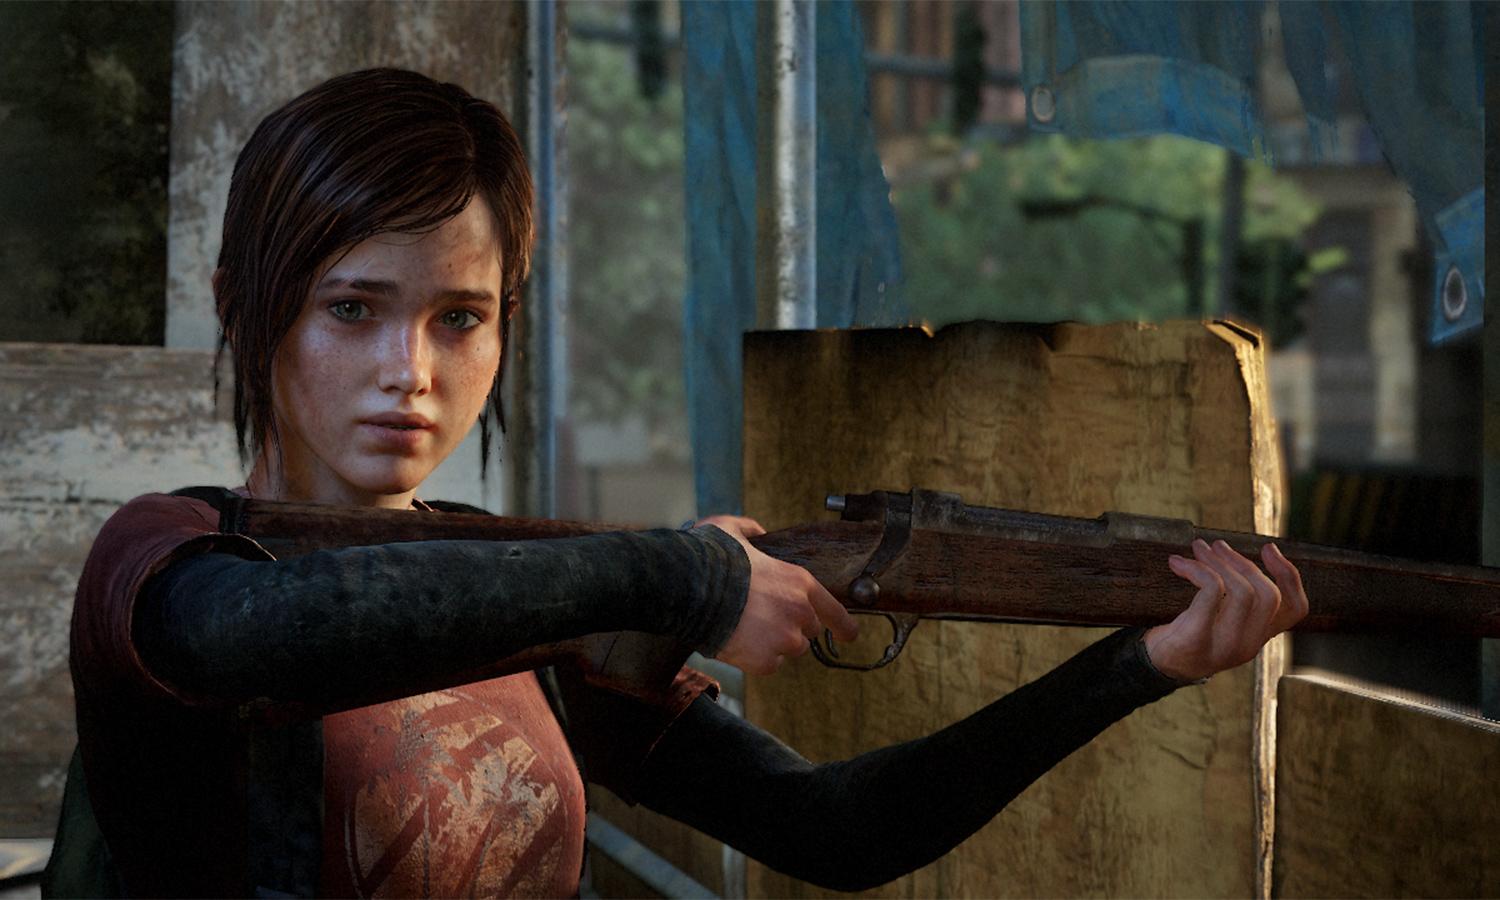 Cool wallpaper  The last of us, The lest of us, Gaming wallpapers